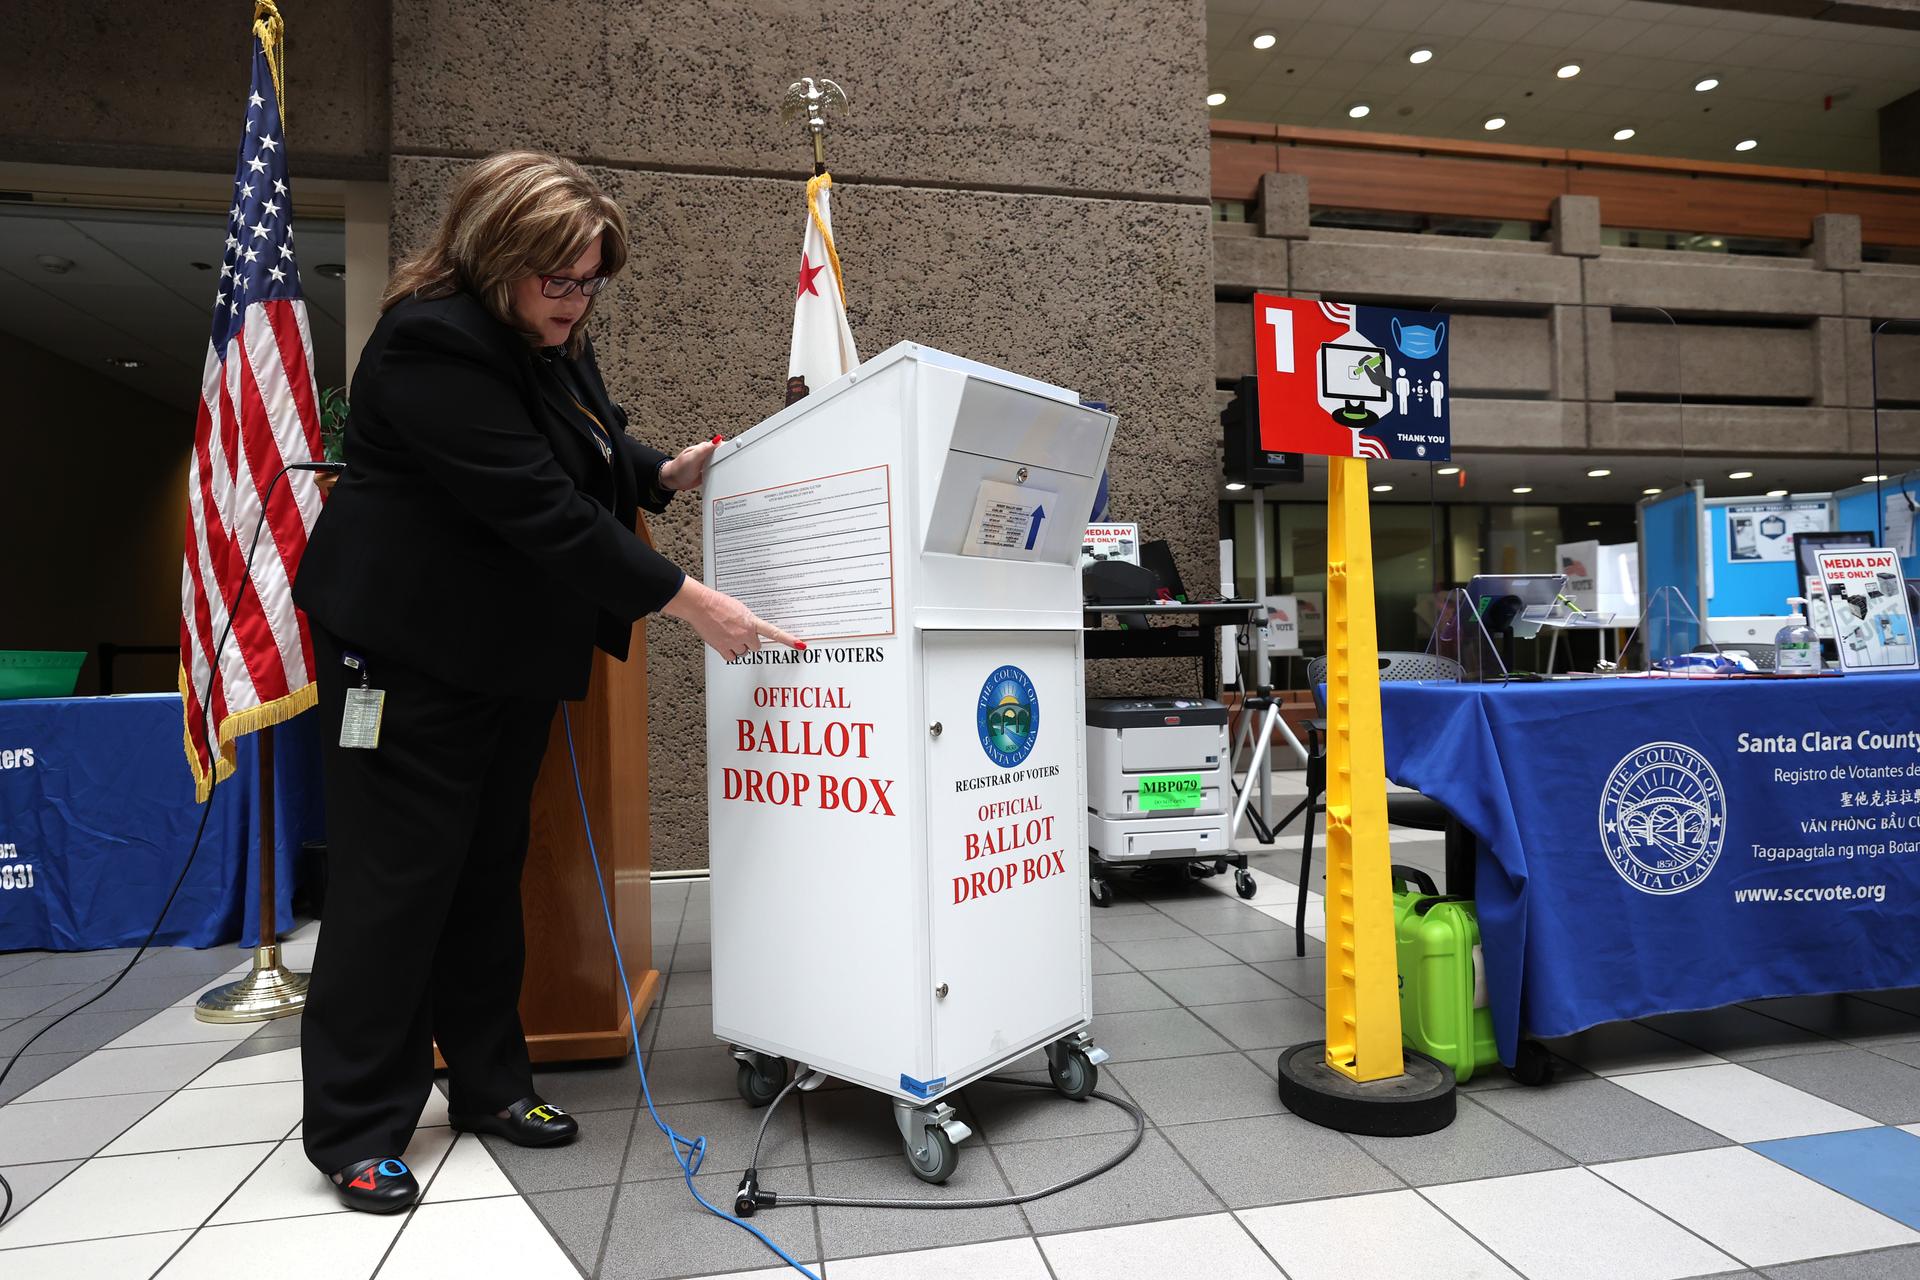 A woman stands next to a ballot box, pointing at specific details.